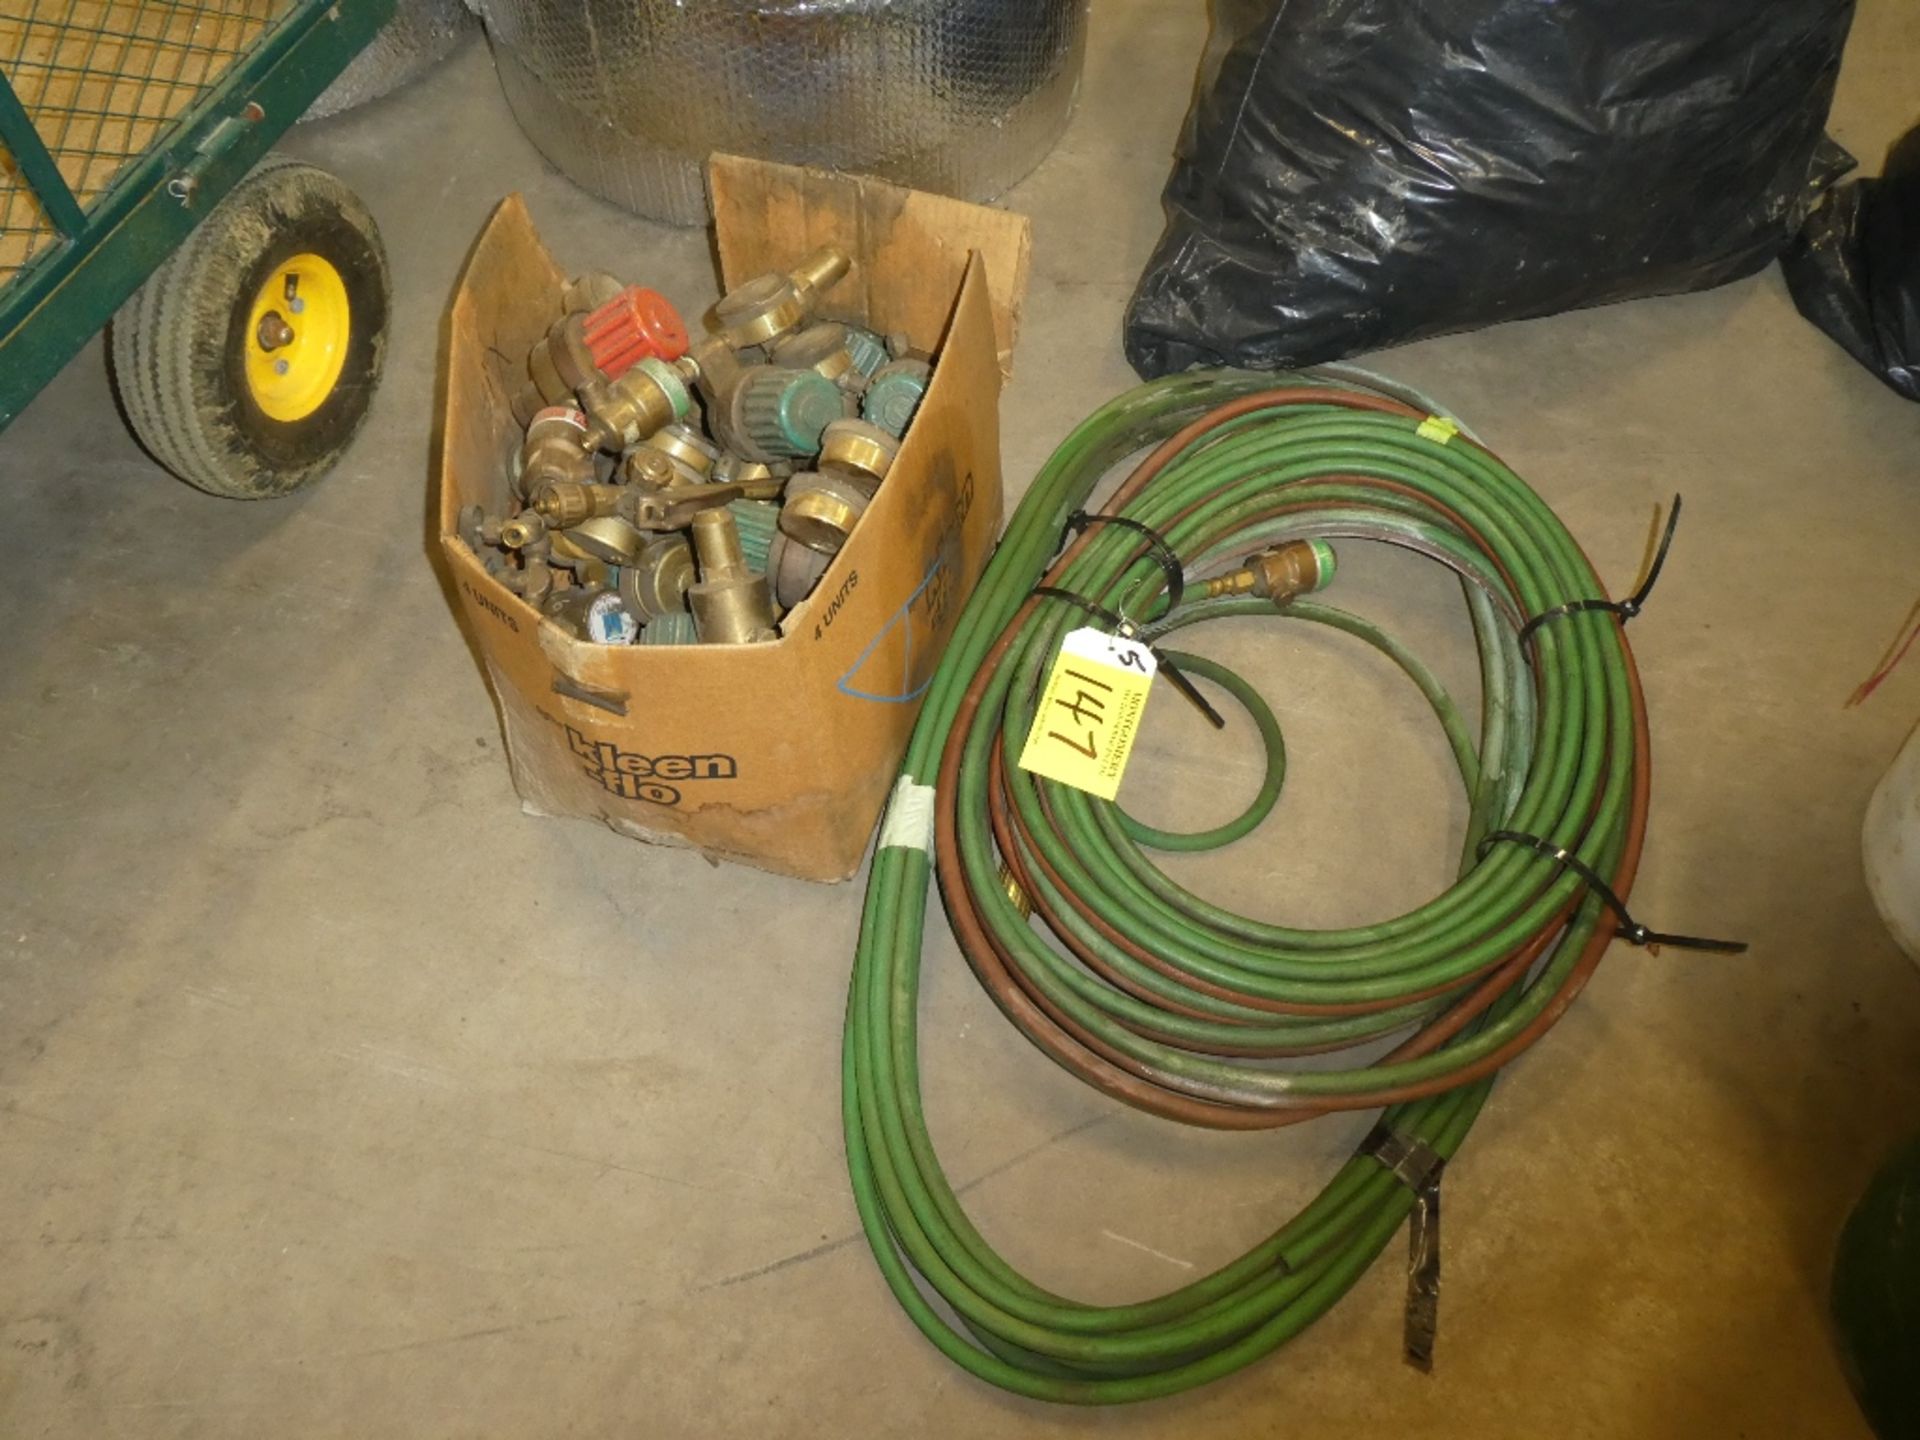 L/O WELDING GAUGES, CUTTING TORCHES, CABLE, ETC